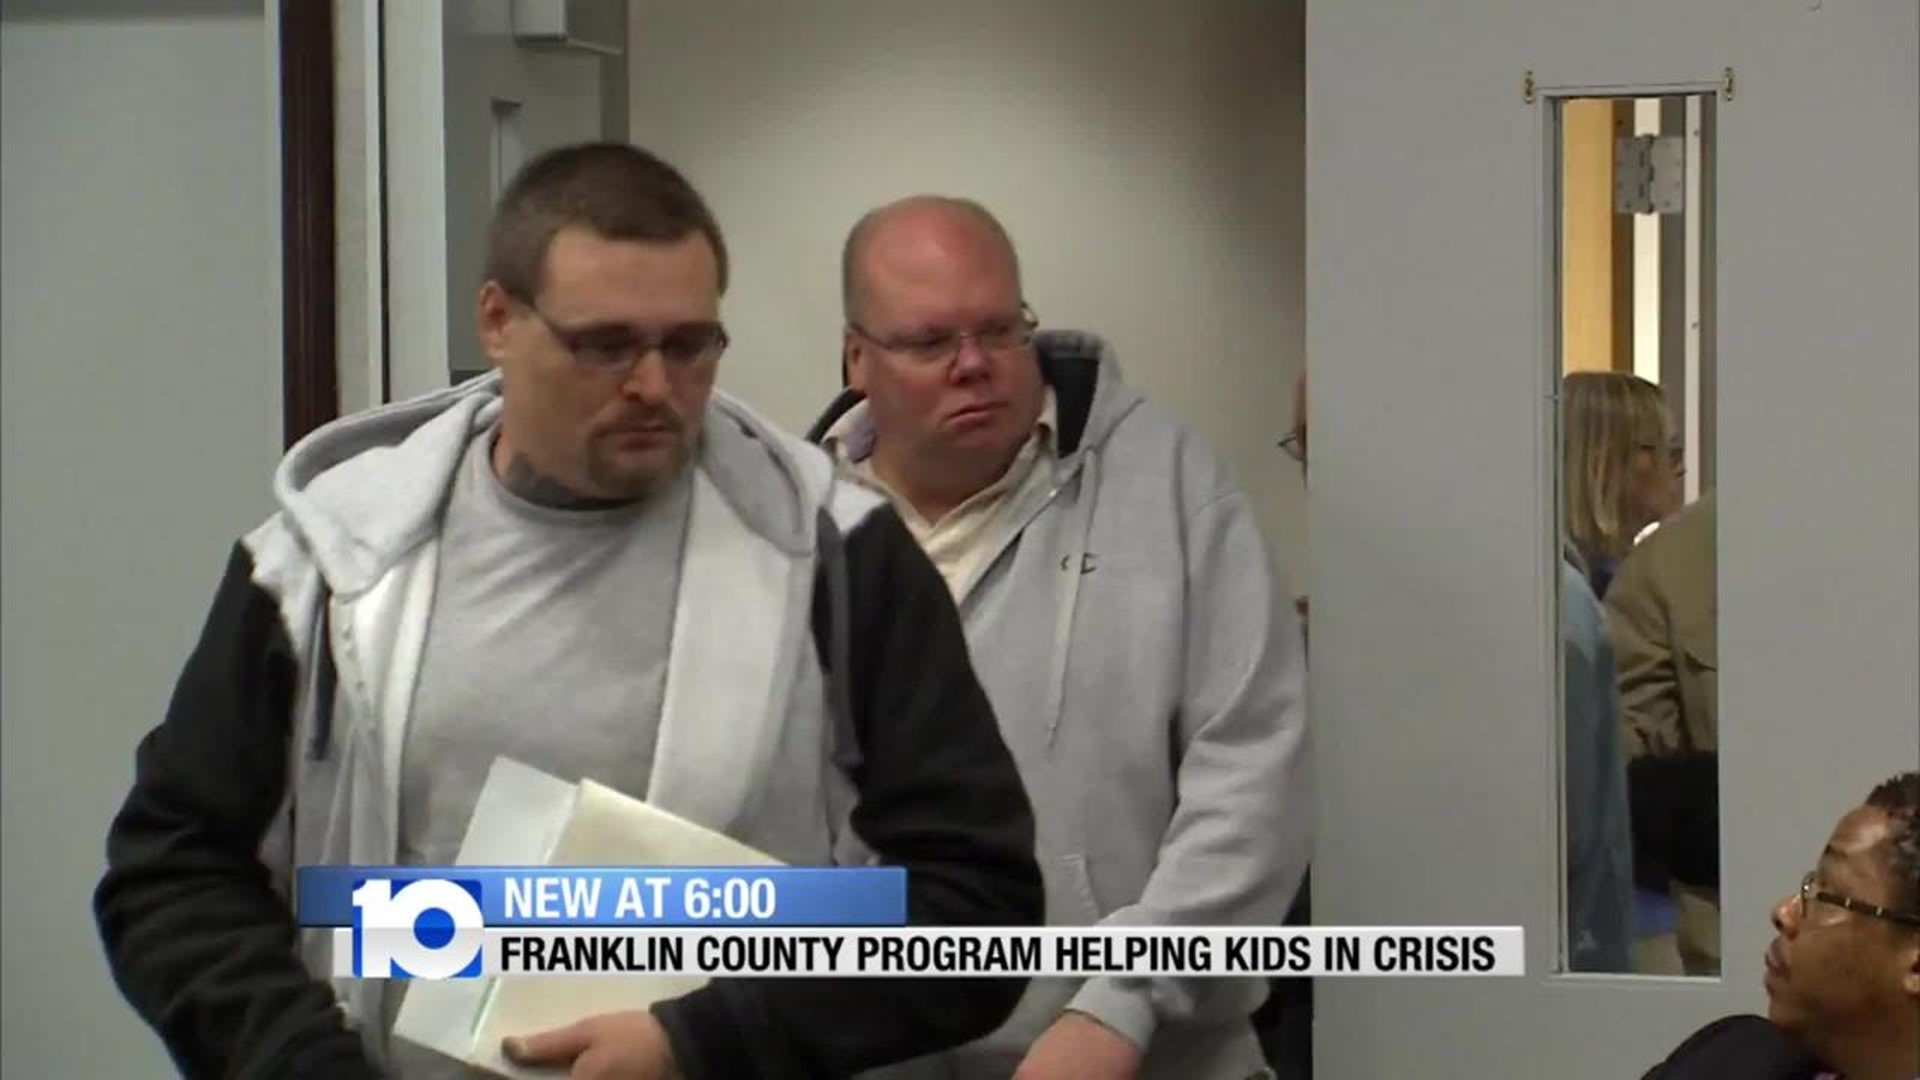 Franklin County Courts Using Innovative Child Support Program